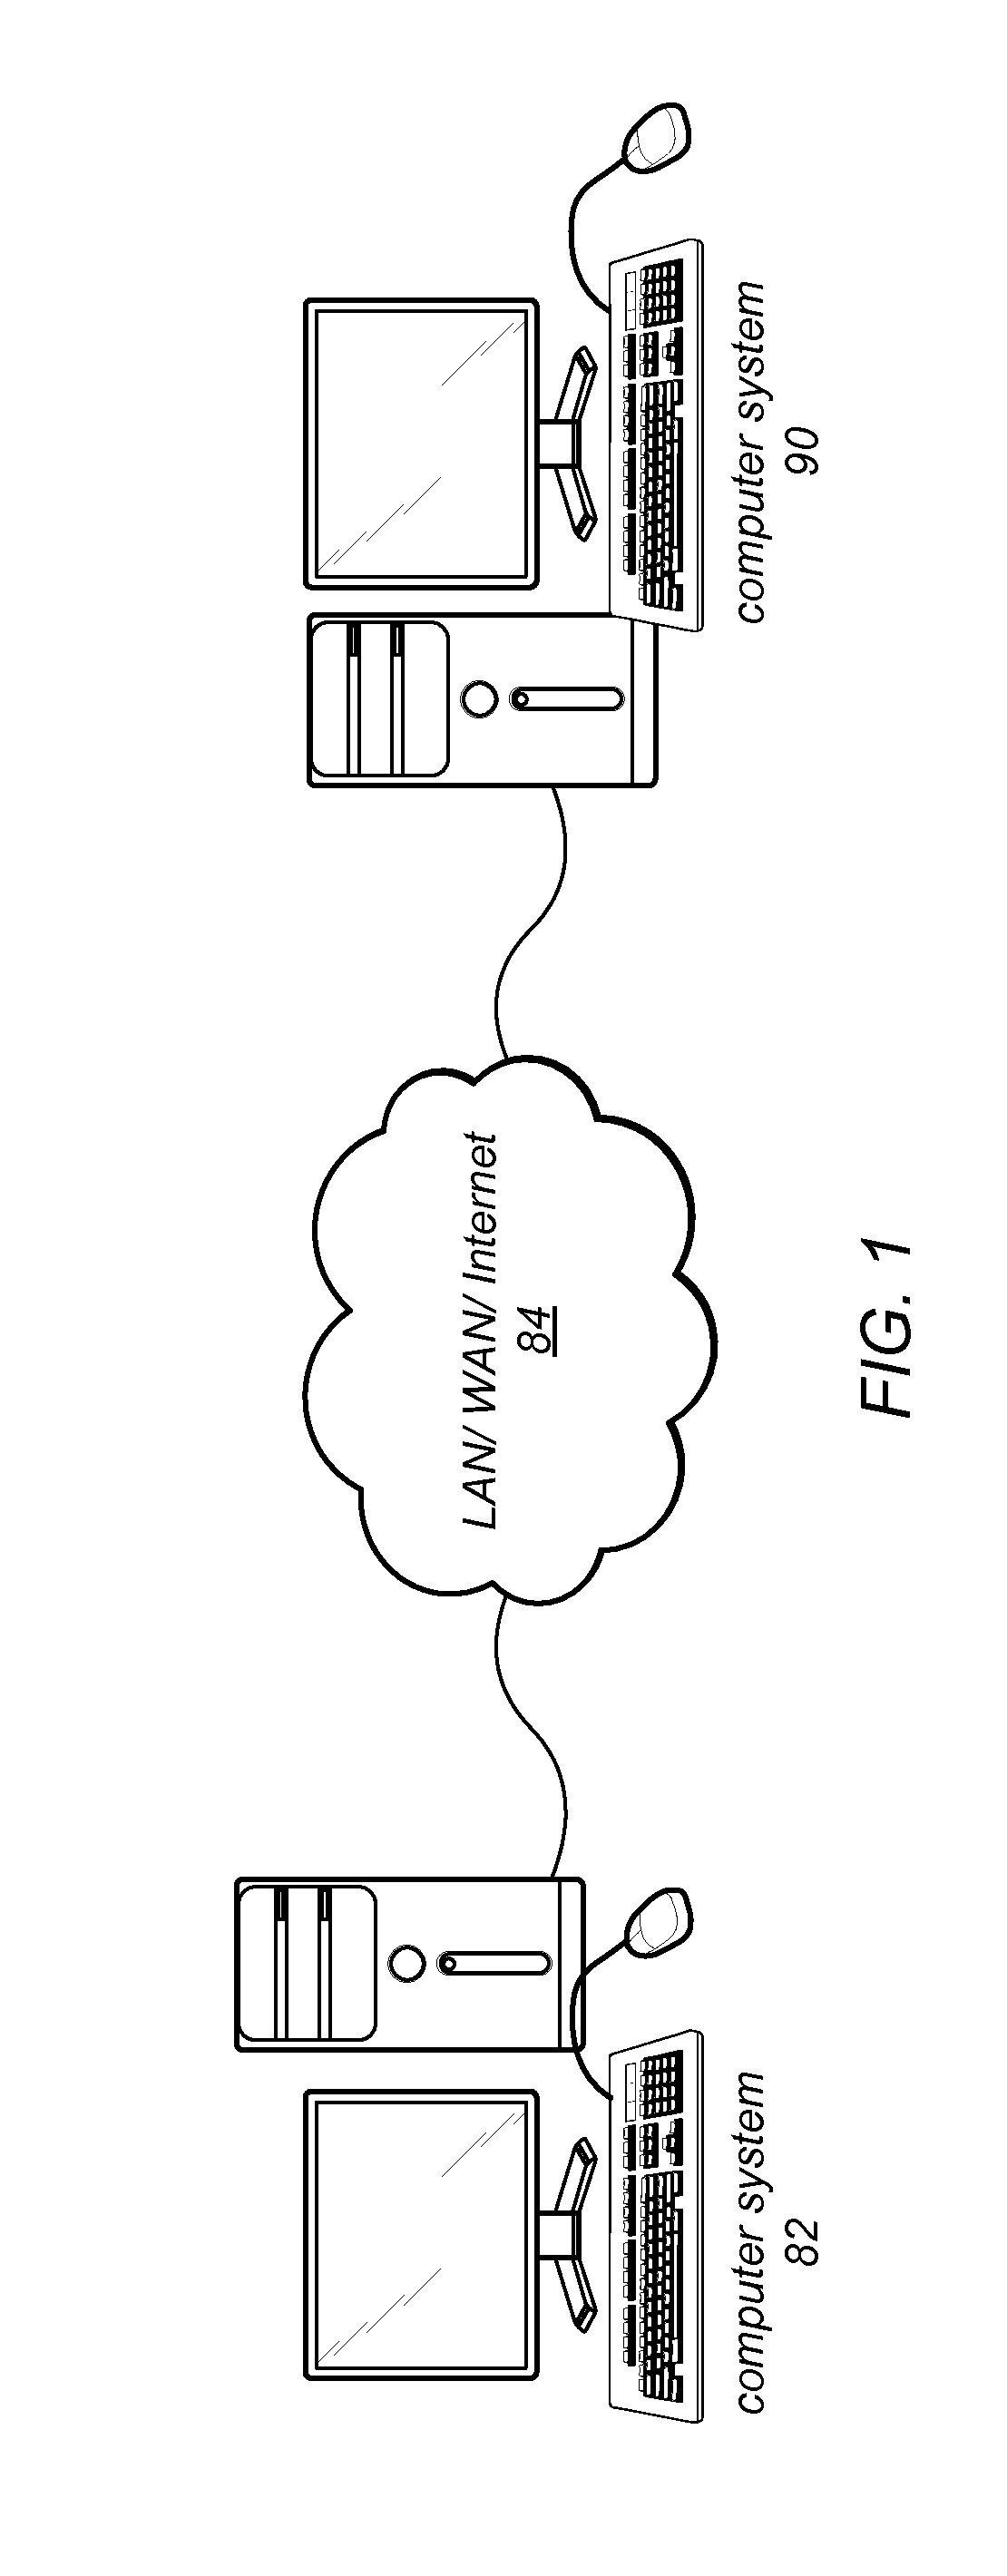 Displaying Physical Signal Routing in a Diagram of a System